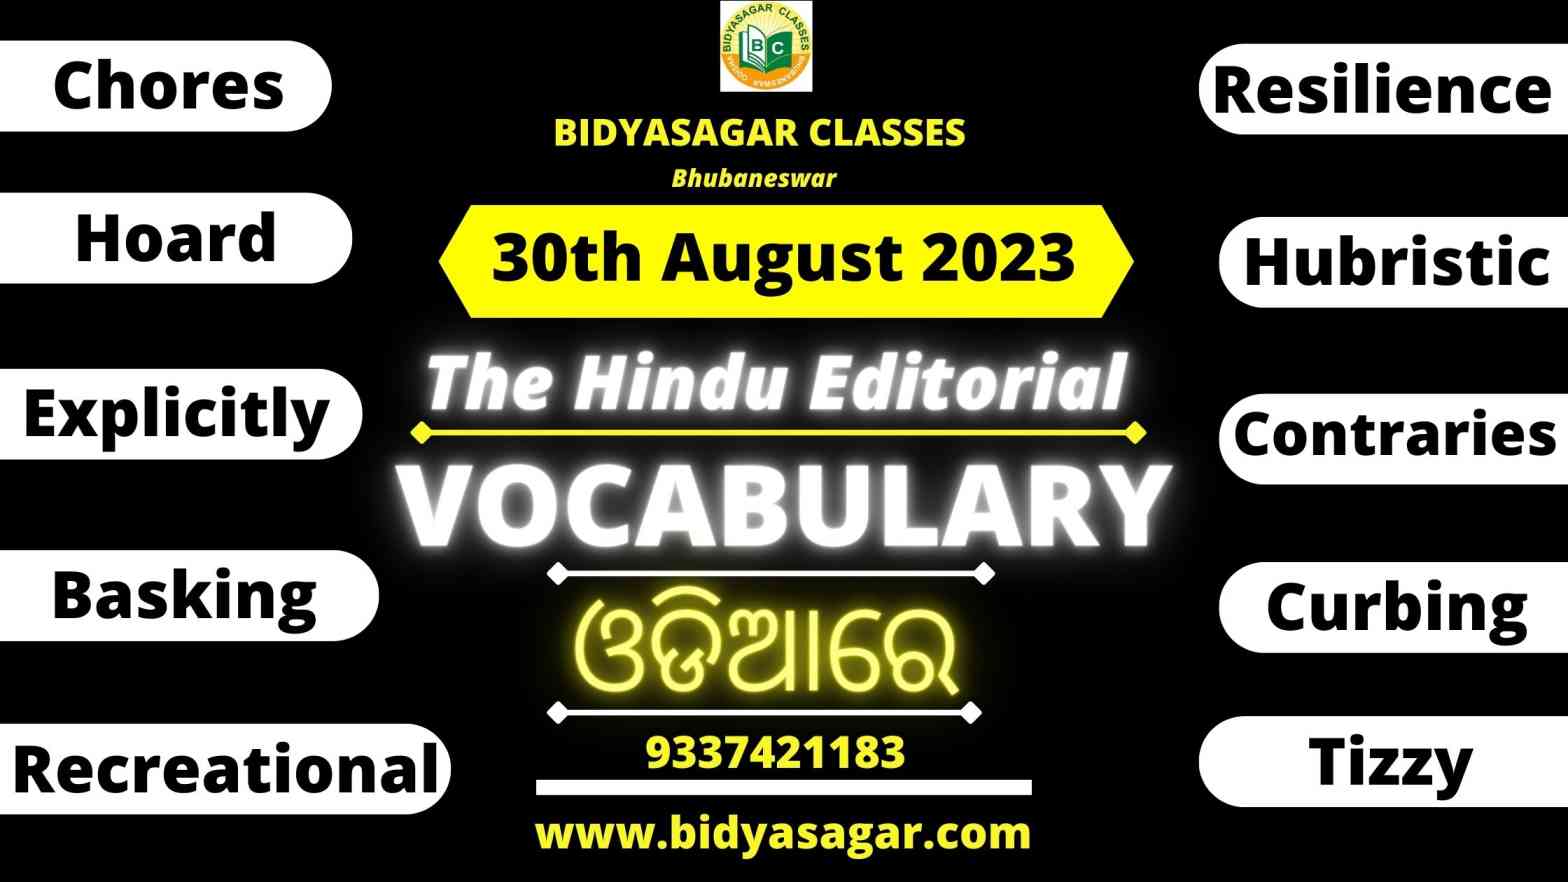 The Hindu Editorial Vocabulary of 30th August 2023